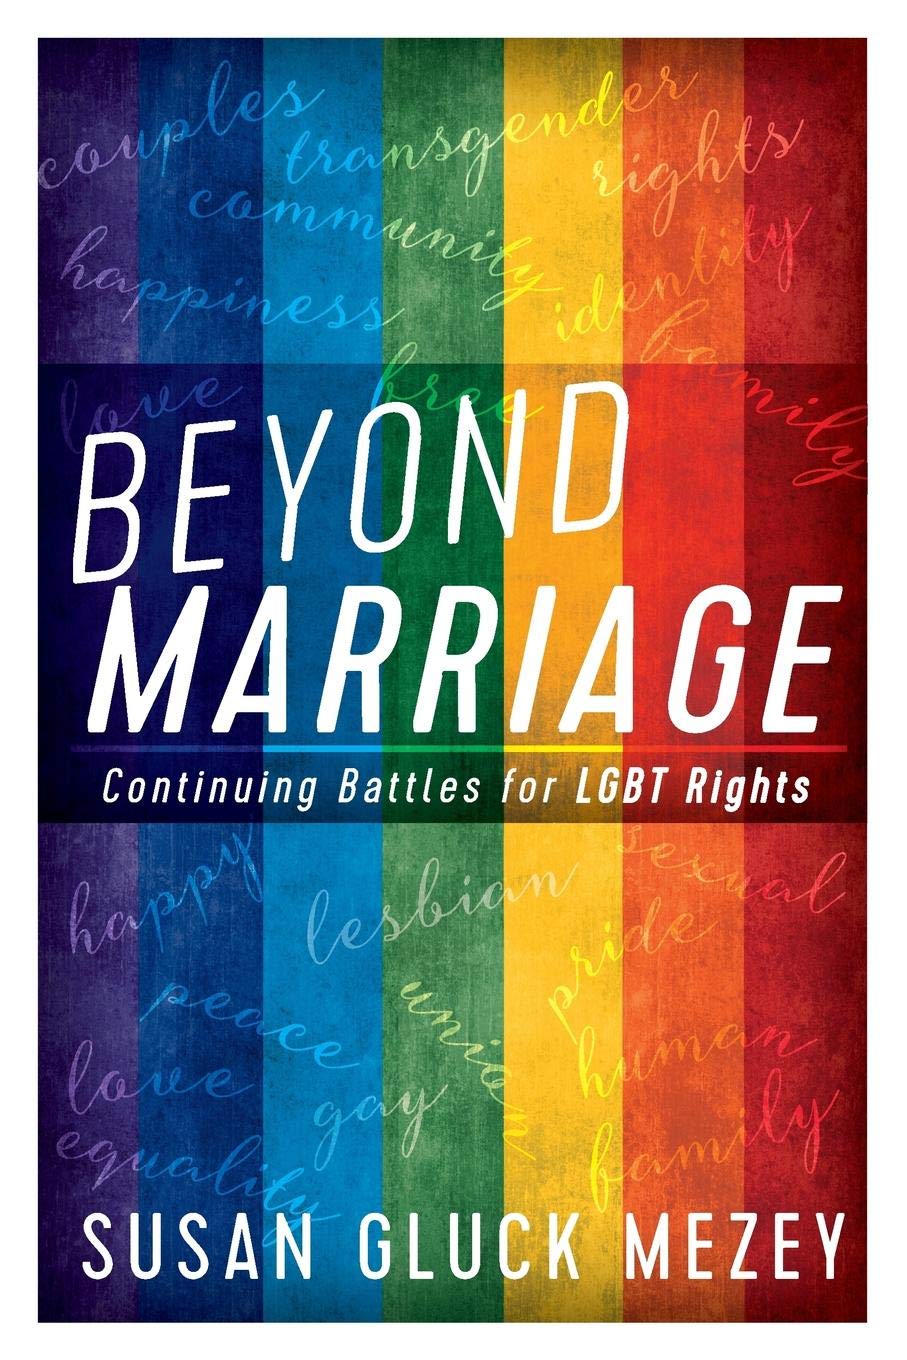 Beyond Marriage by Susan Gluck Mezey